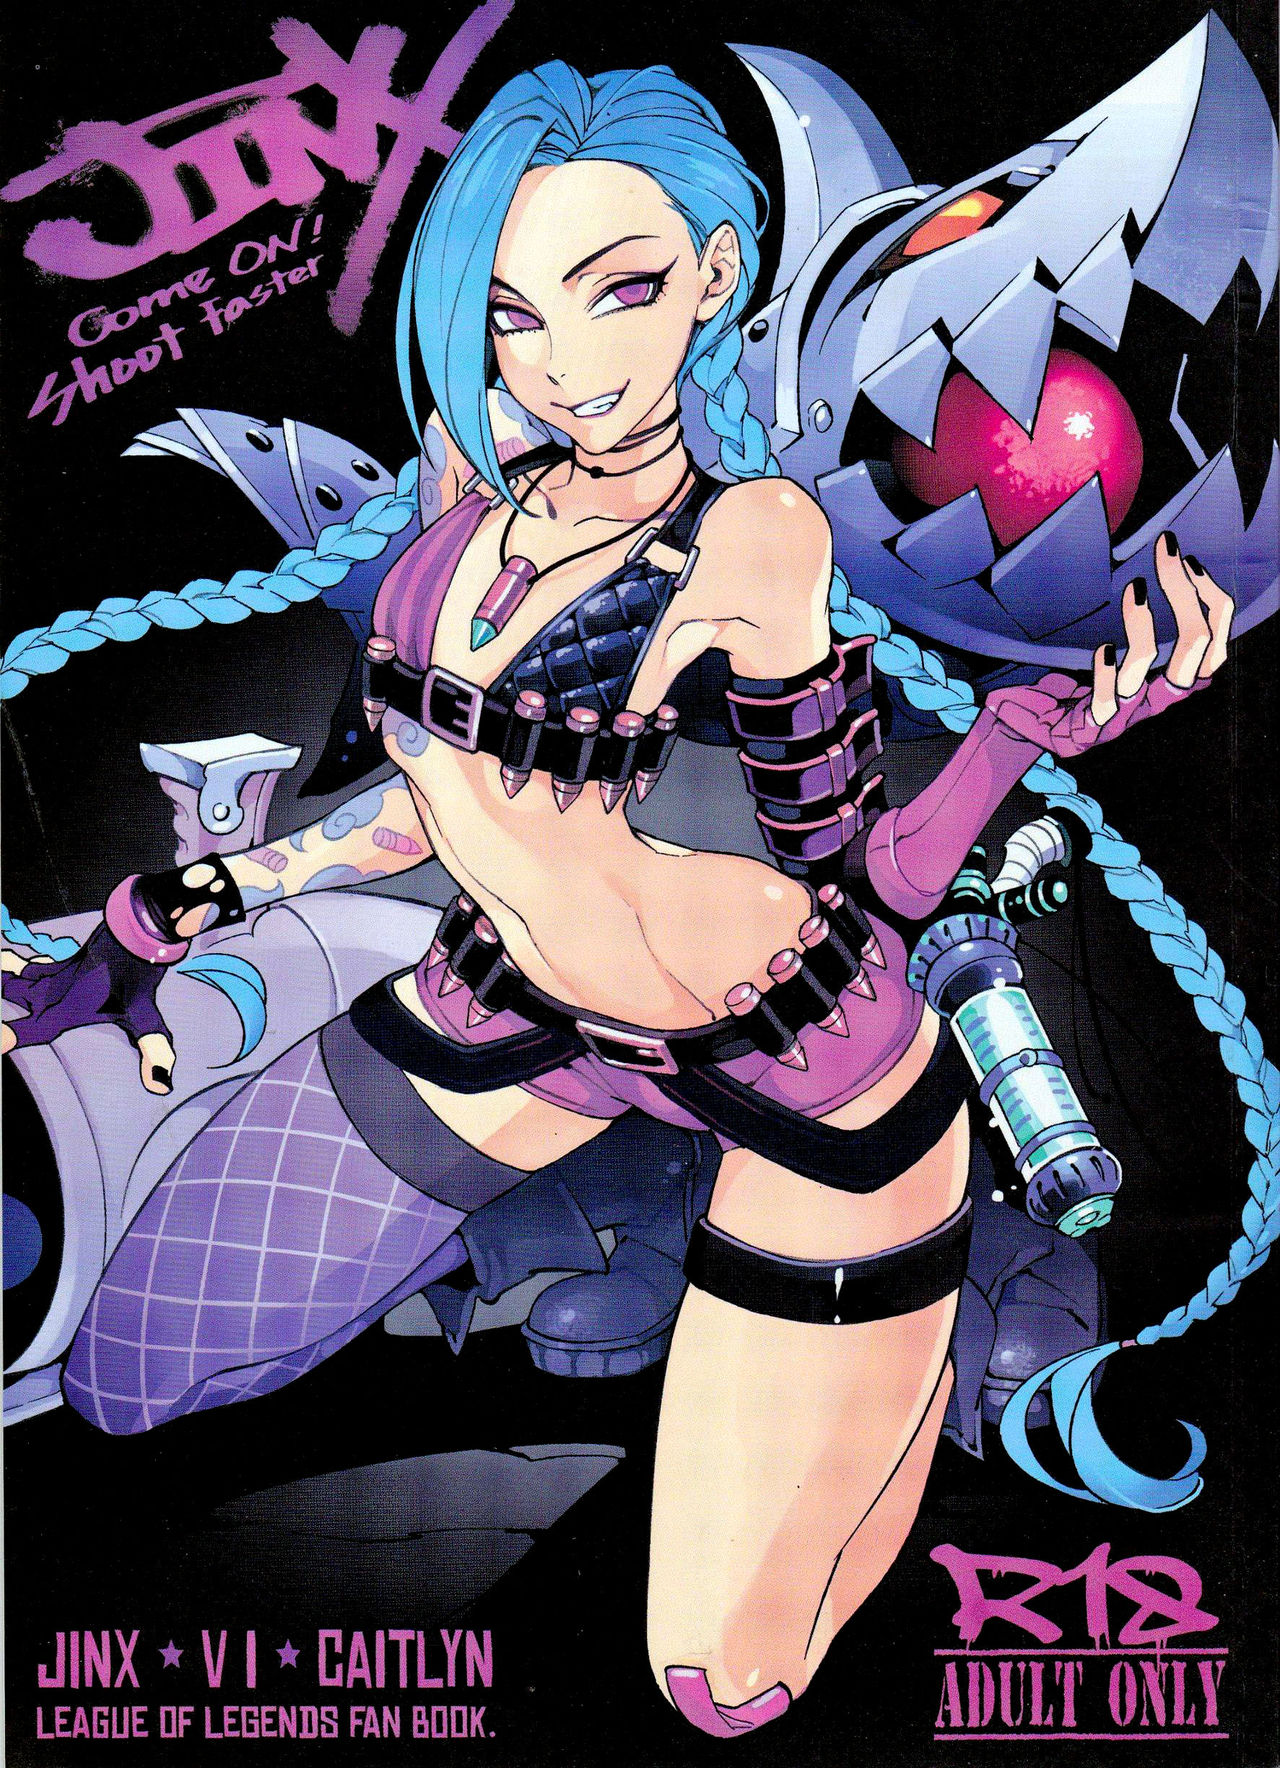 (FF23) [Turtle.Fish.Paint (Hirame Sensei)] JINX Come On! Shoot Faster (League of Legends) [Spanish] {ElMoeDela8} (FF23) [Turtle.Fish.Paint (比目魚先生)] JINX Come On! Shoot Faster (リーグ・オブ・レジェンズ) [スペイン翻訳]